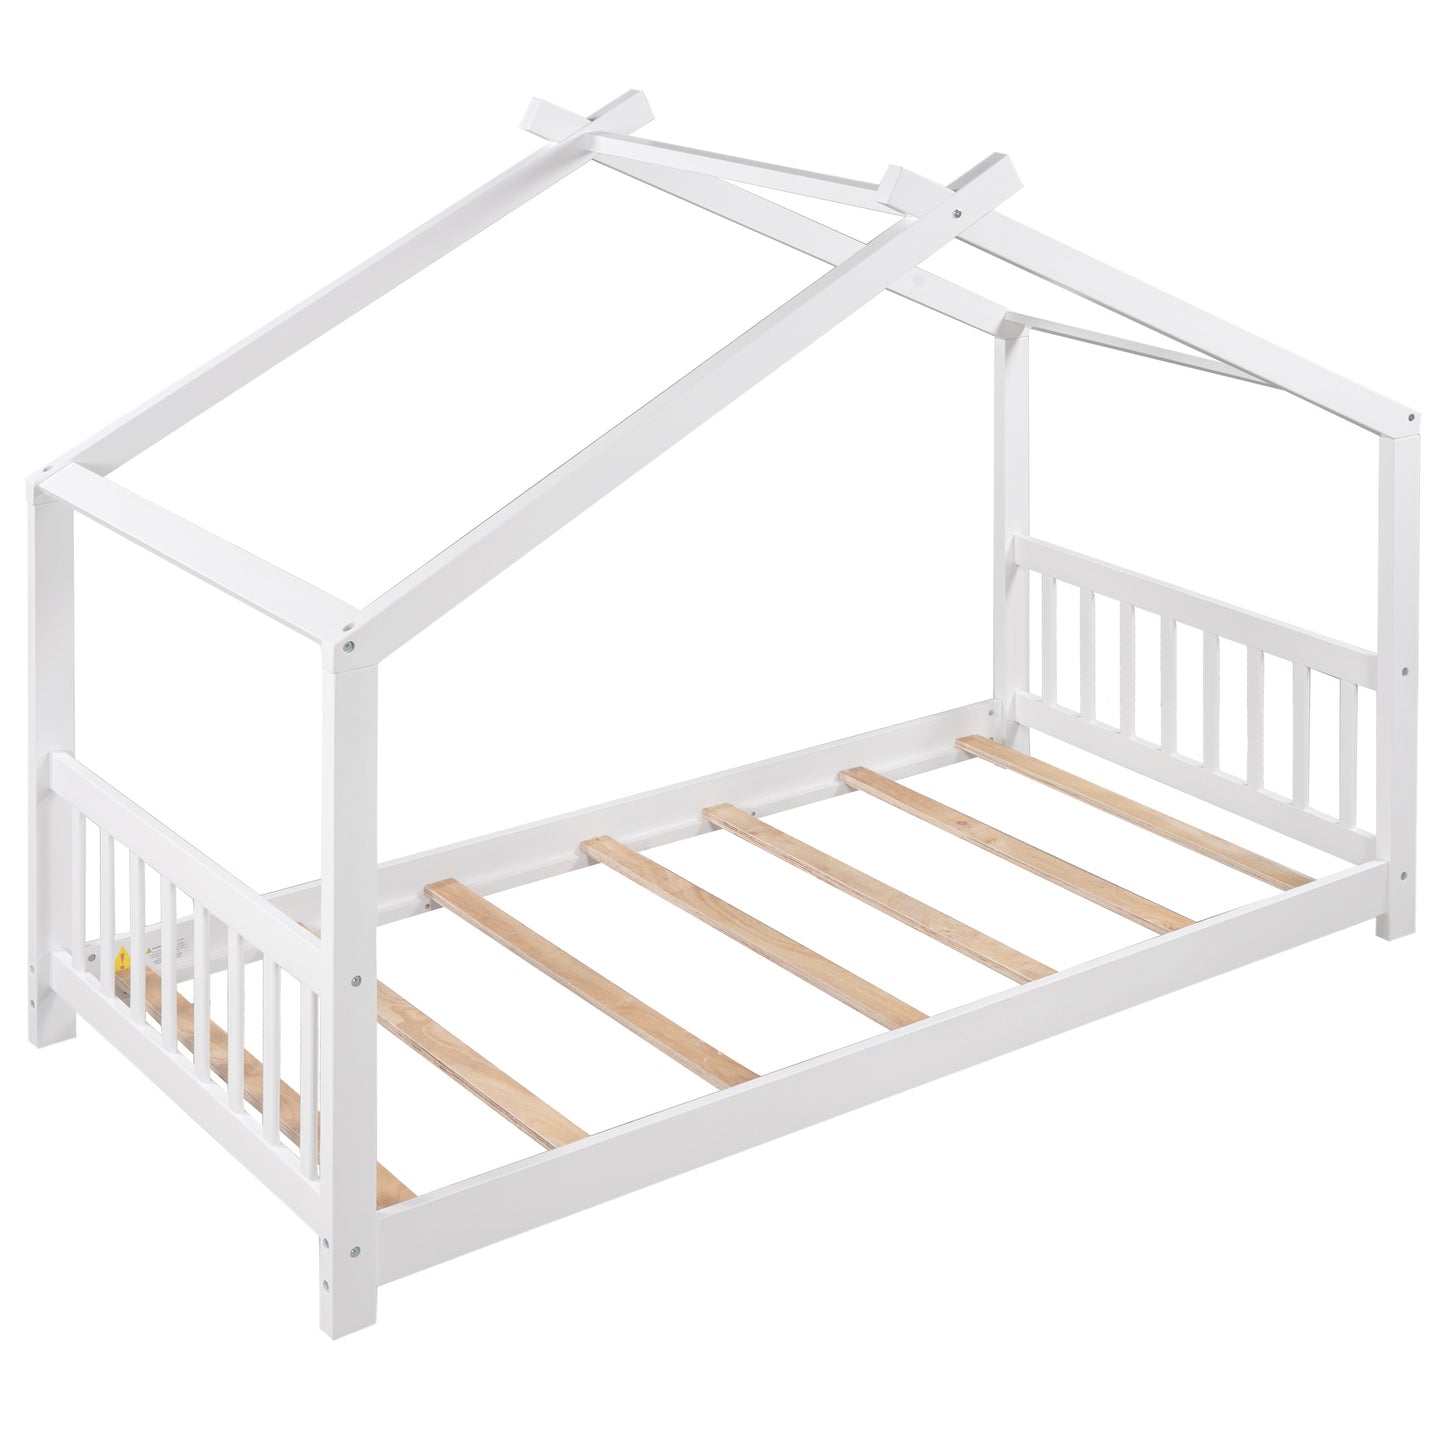 Twin Size House Platform Bed with Headboard and Footboard,Roof Design,White